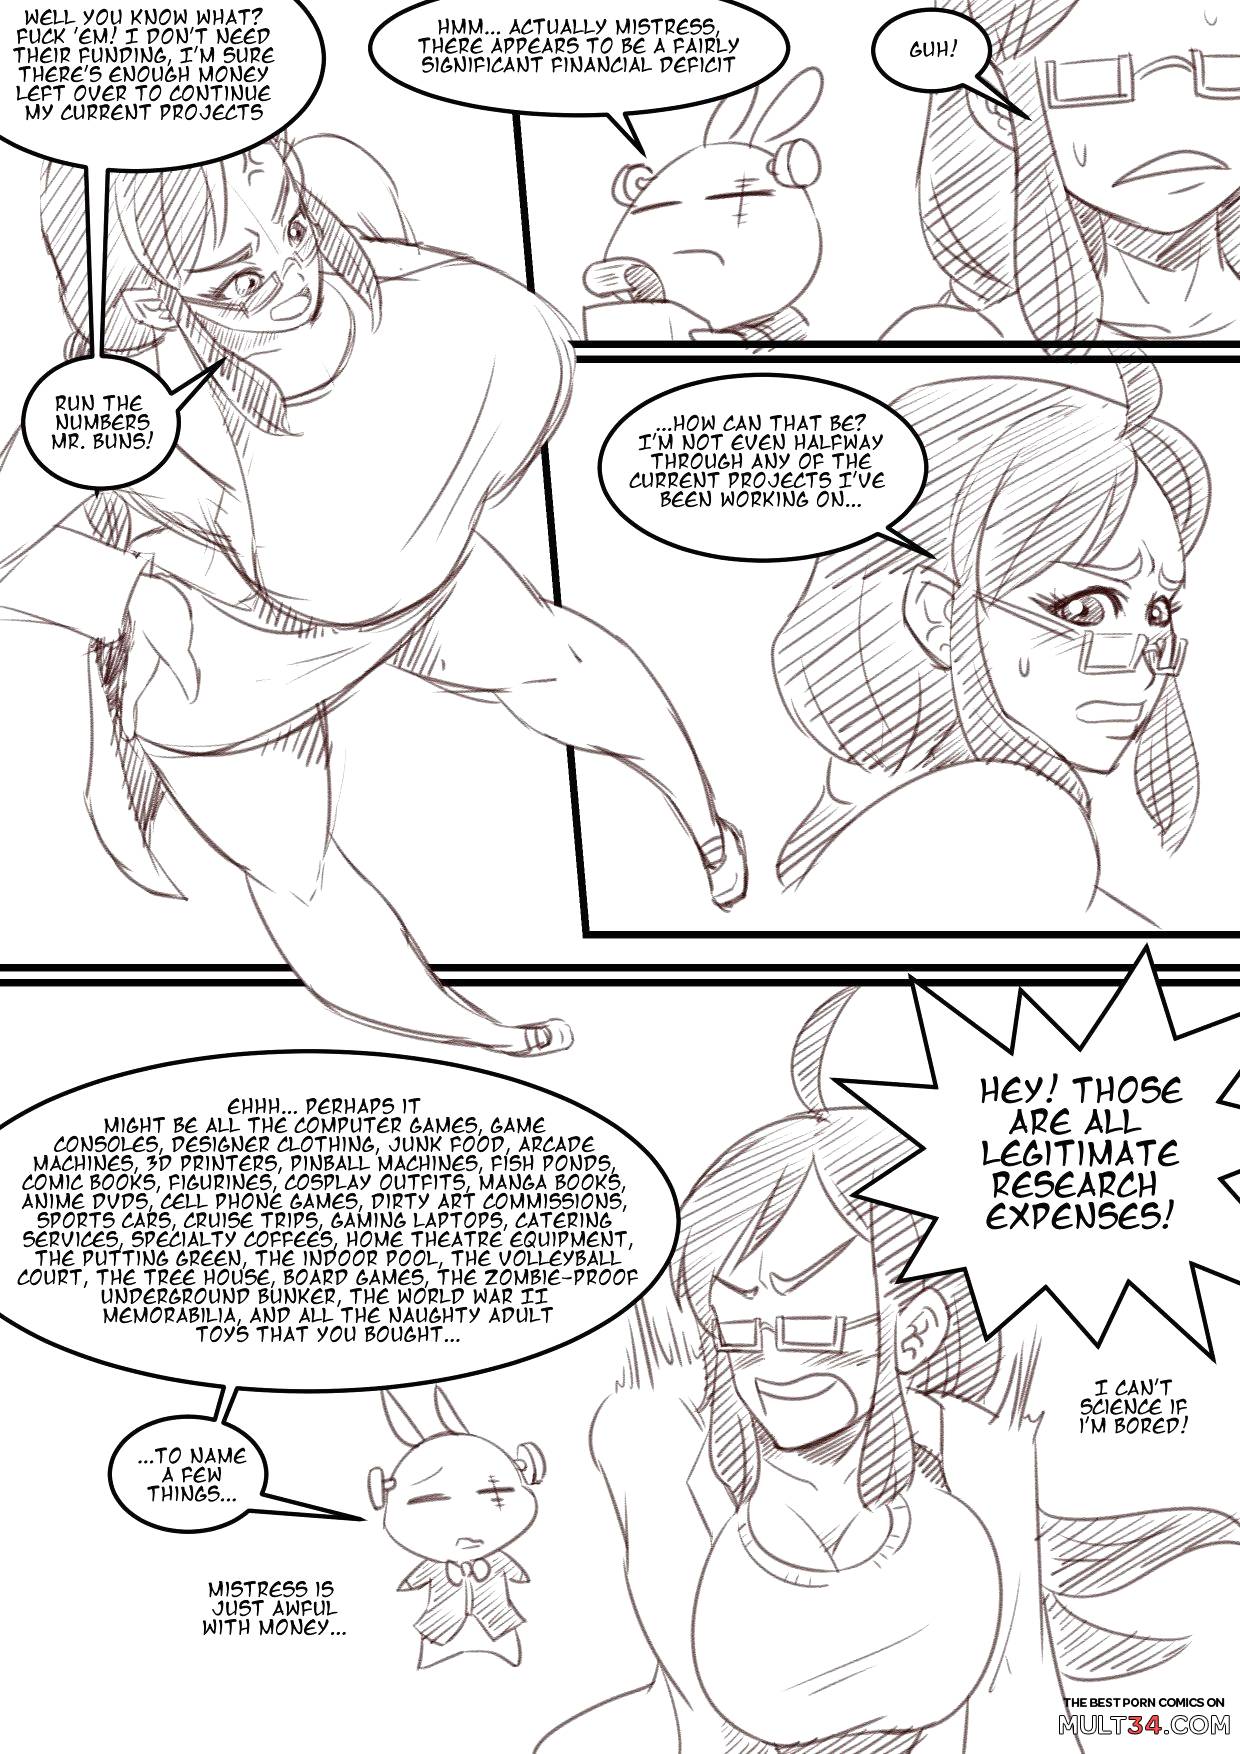 The Doppeler Effect page 4